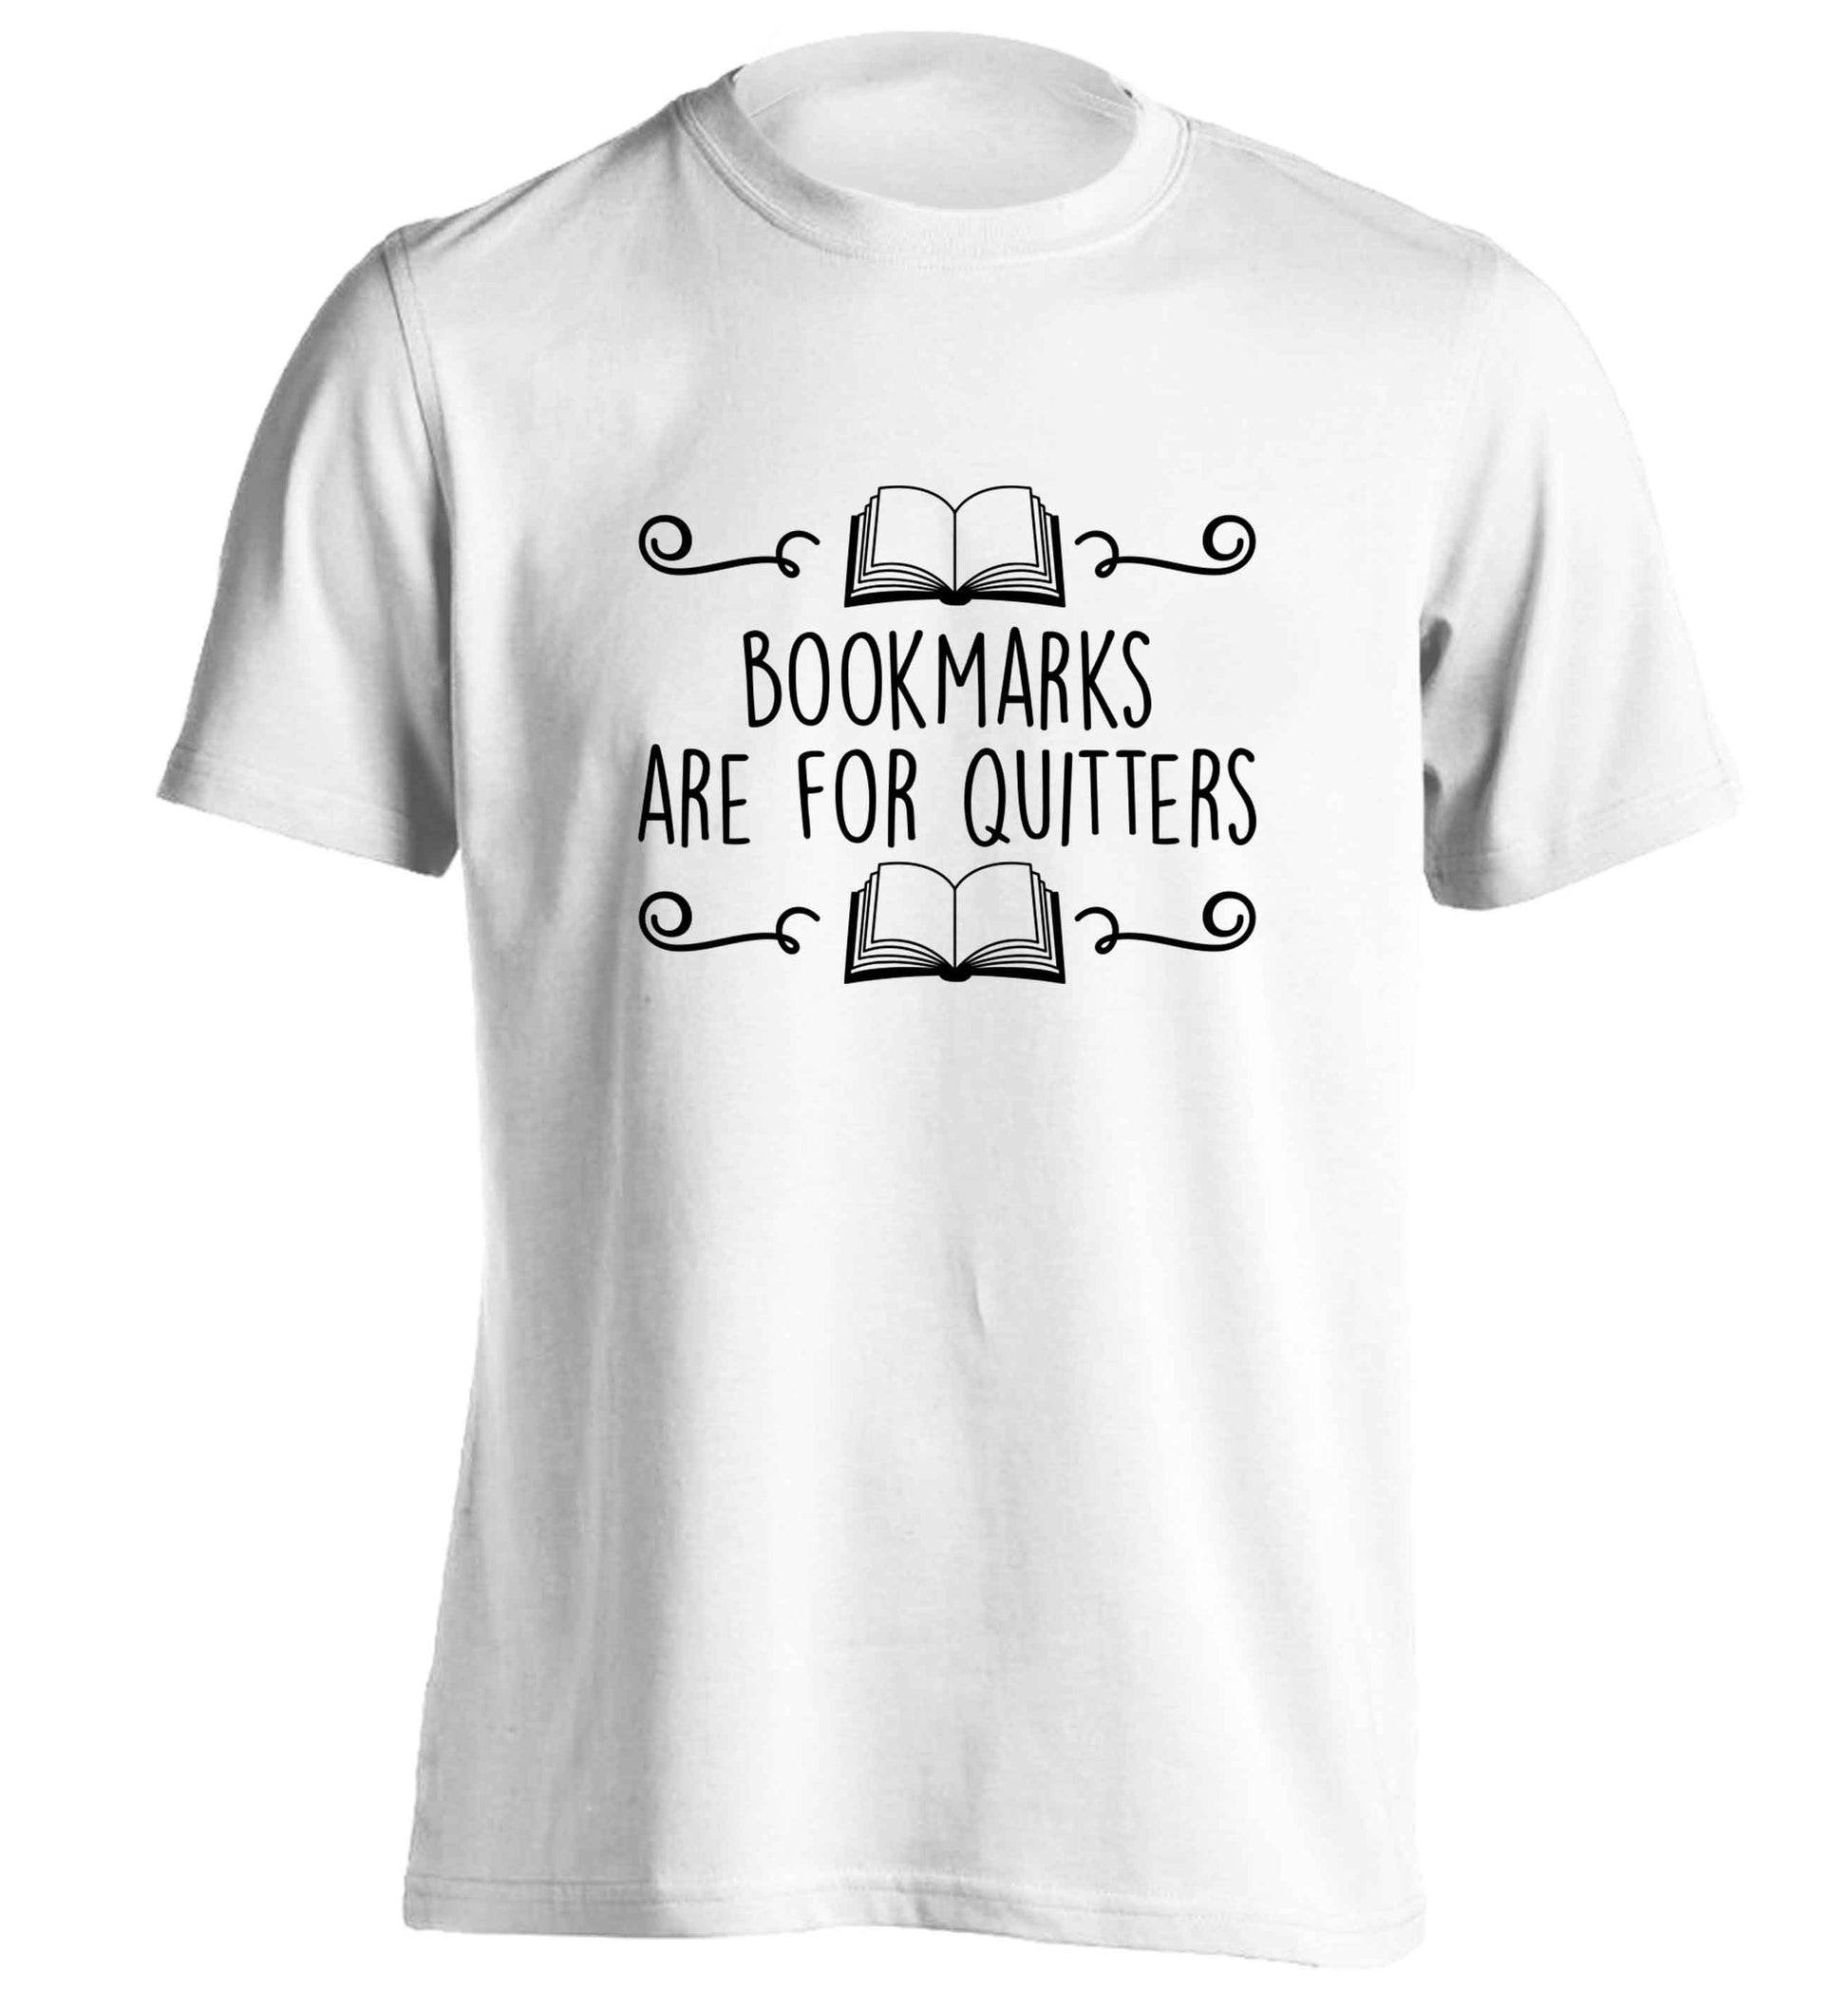 Bookmarks are for quitters adults unisex white Tshirt 2XL